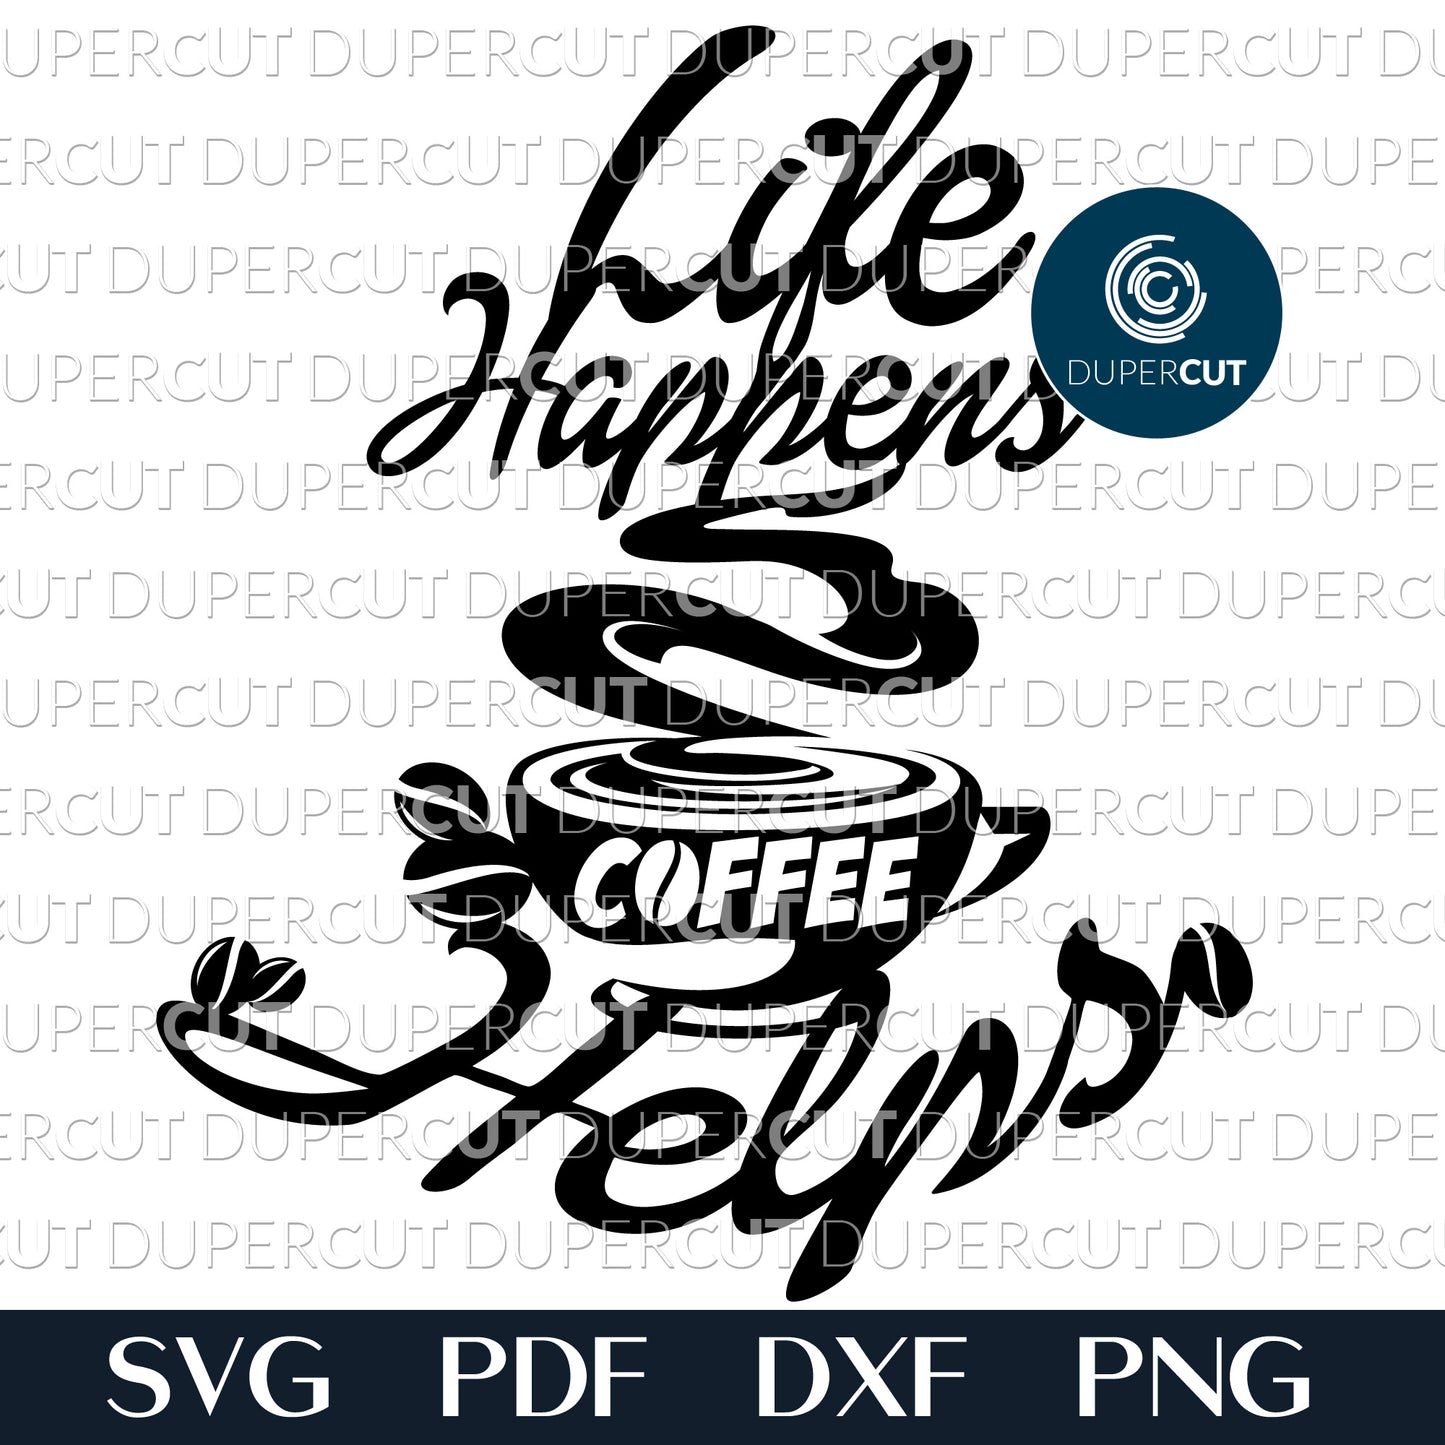 Life happens coffee helps - FREE cutting files SVG PDF DXF paper cutting template by DuperCut, for Glowforge, Cricut, Silhouette Cameo, CNC plasma machines